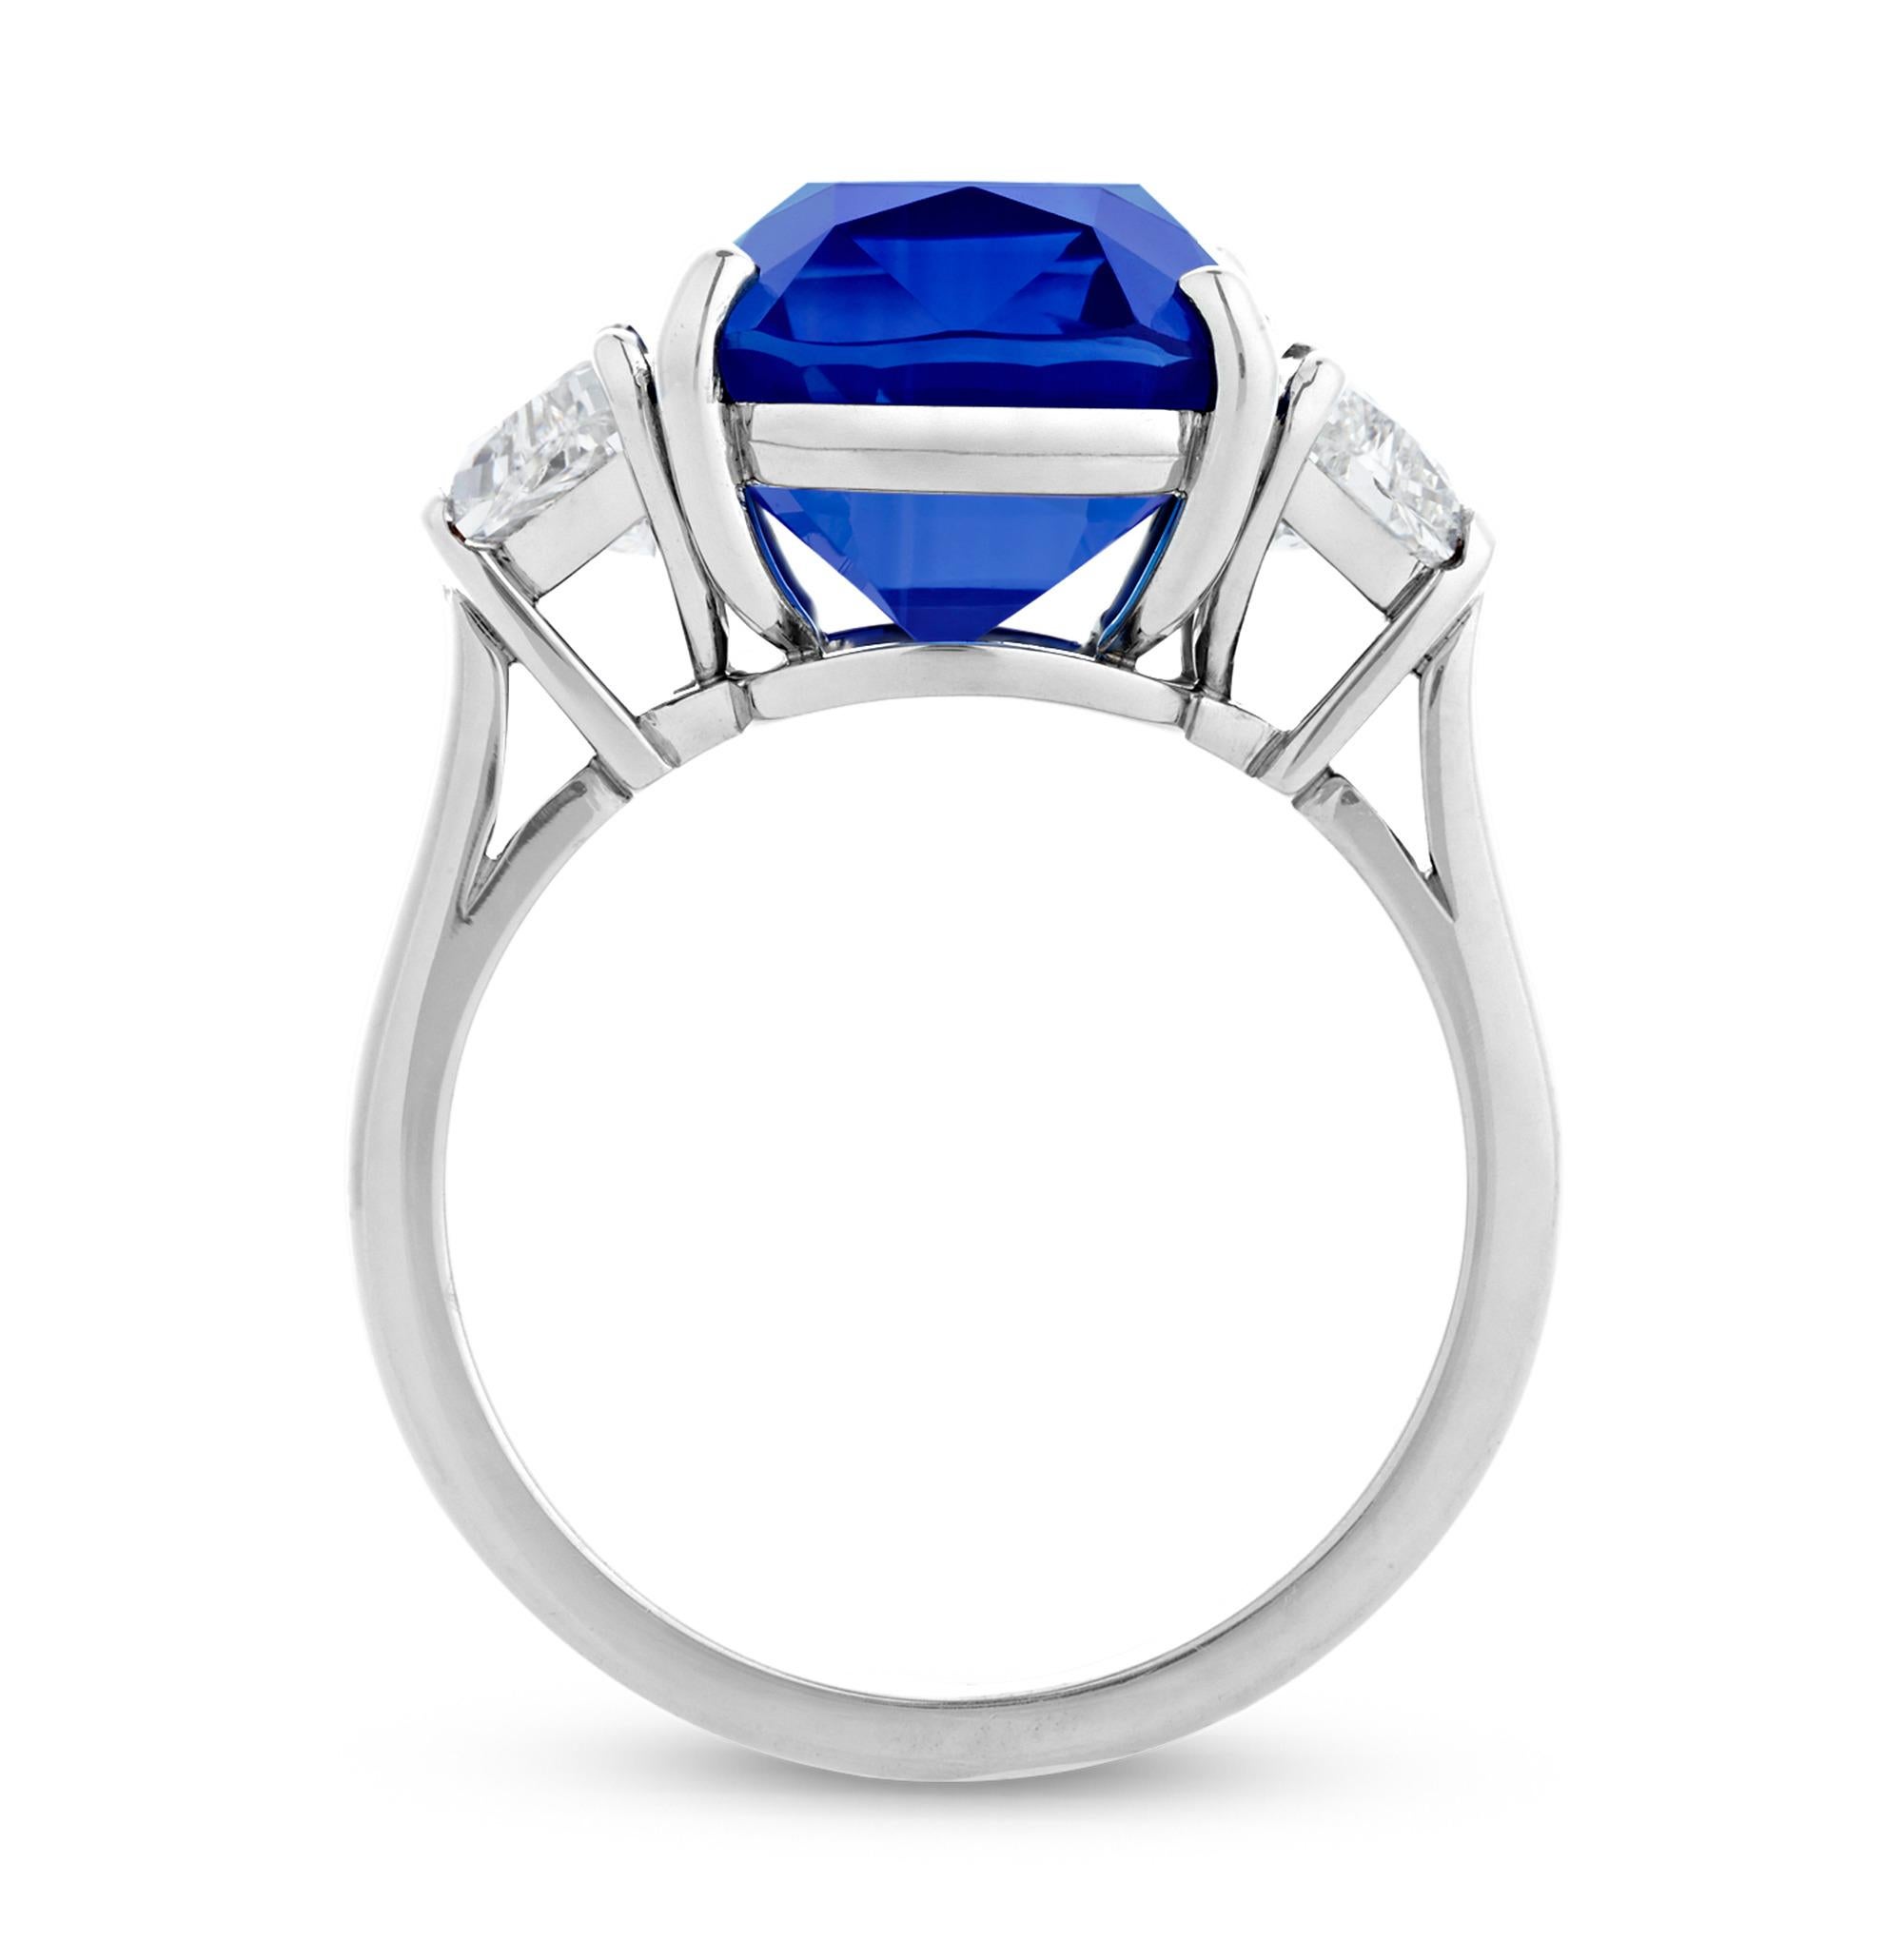 A 9.80-carat unheated Ceylon sapphire exhibits its coveted royal blue hue at the center of this ring by the celebrated designer Oscar Heyman. Ceylon sapphires are among the most sought-after colored gemstones, highly treasured by collectors for